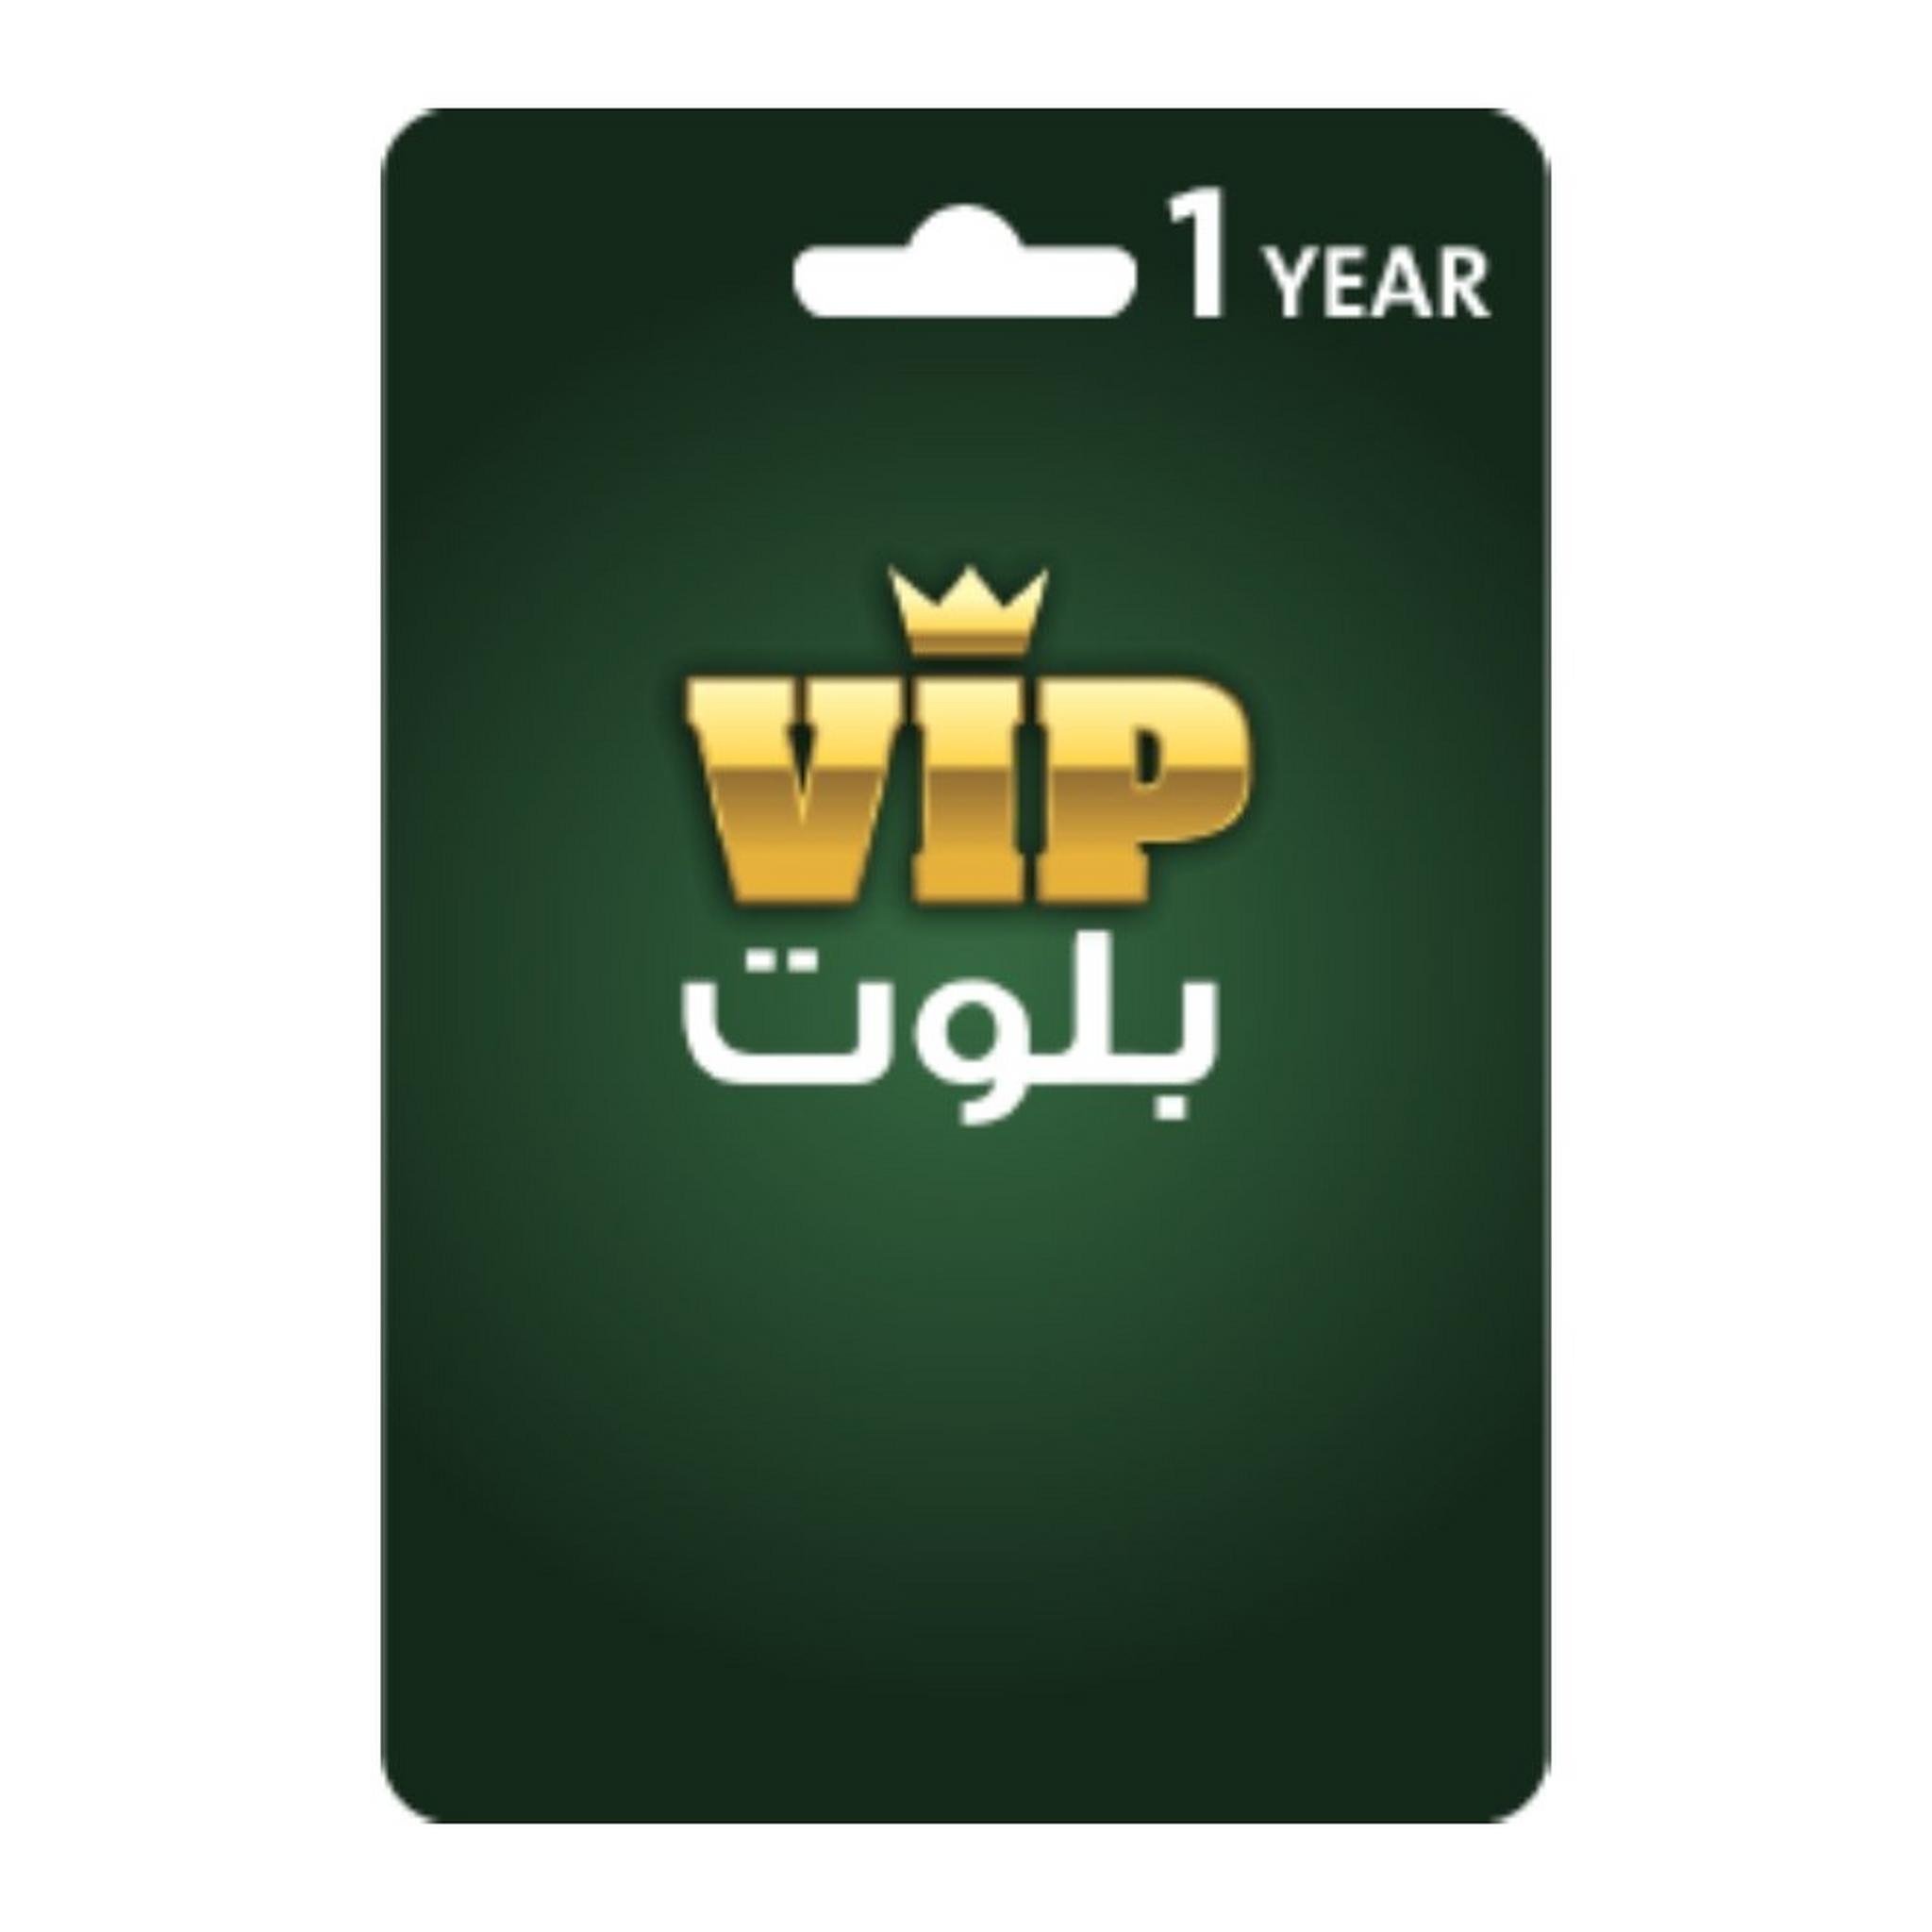 Vip Baloot  For 1 Year